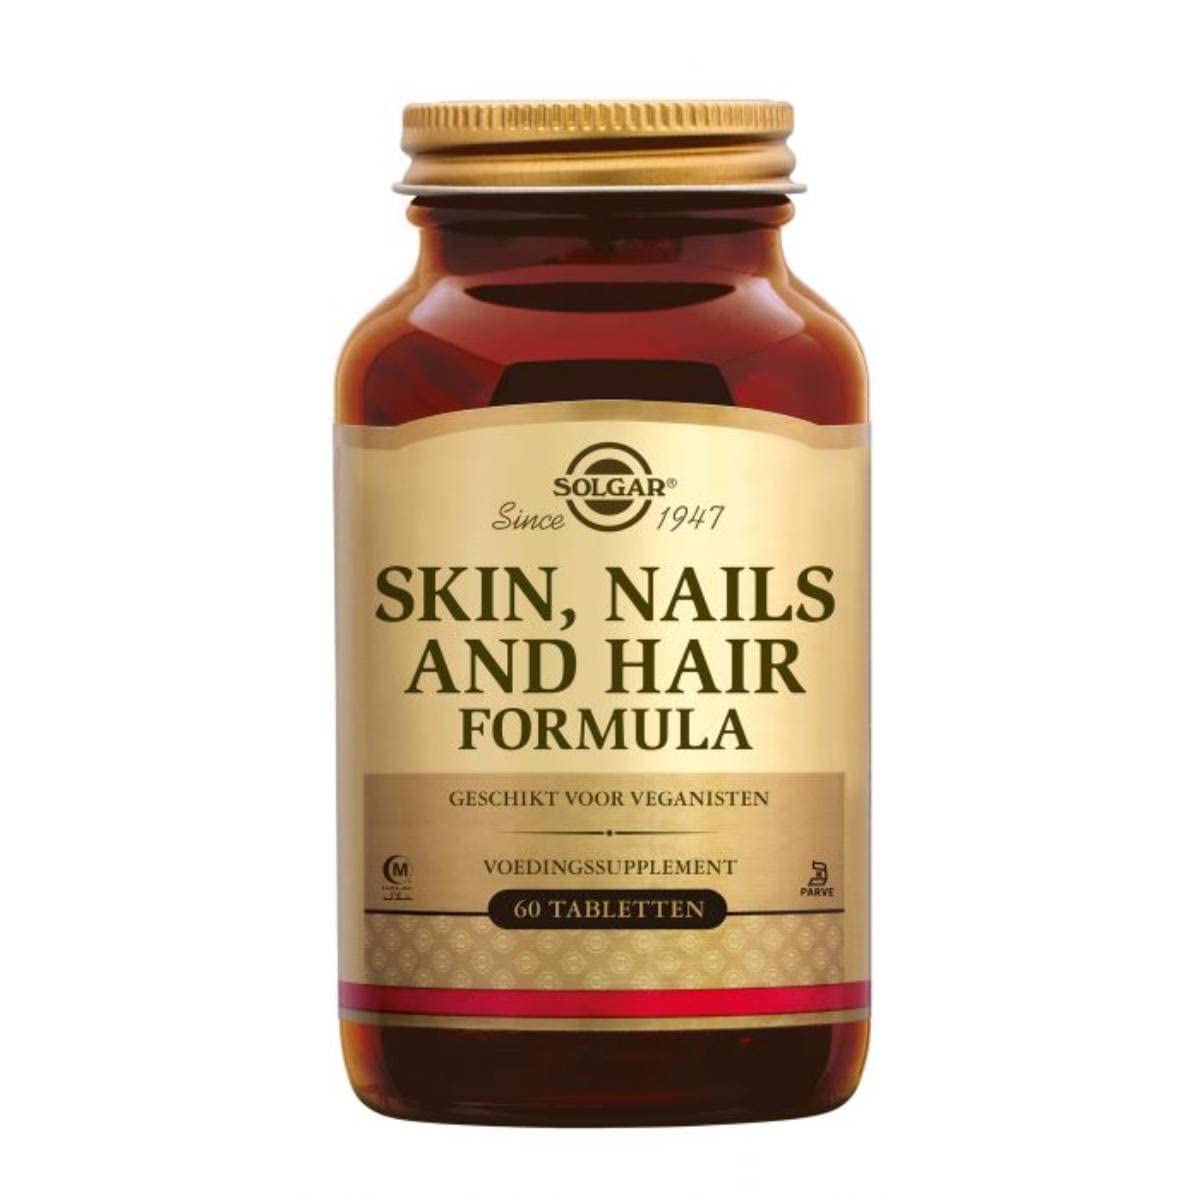 Solgar Skin Hair and Nails - 60 pack - Helps Build Collagen - With Zinc, Copper and Vitamin C - Vegan and Gluten Free